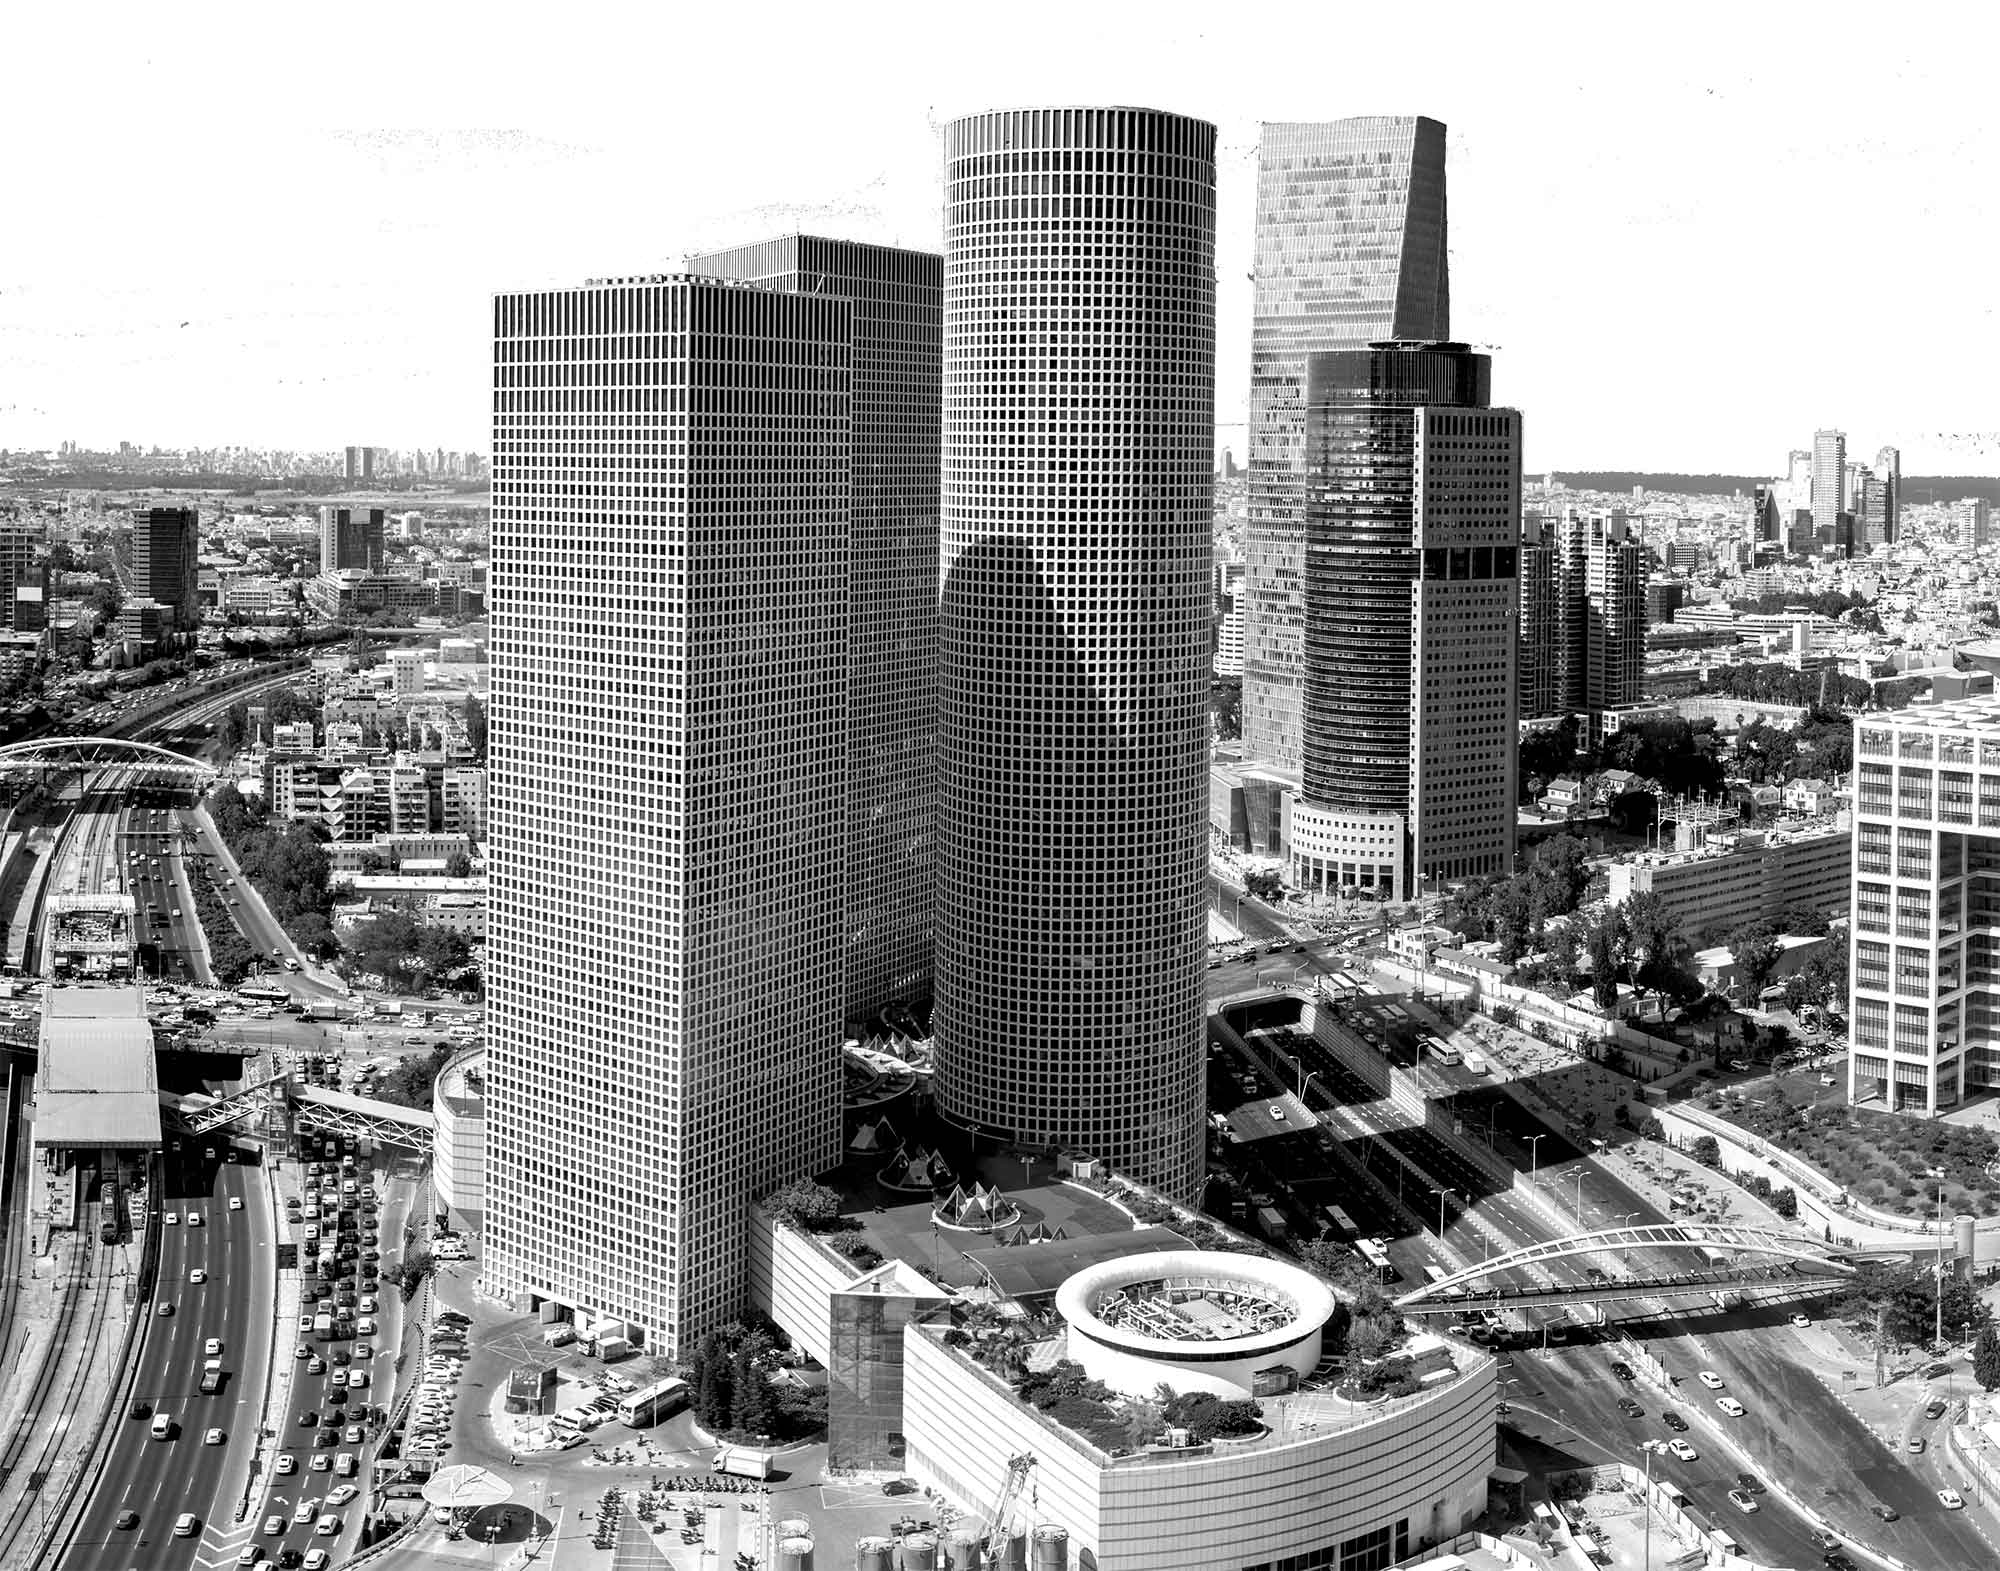 Part of Tel Aviv Skyline (in black and white). In the foreground, the Azrieli Towers Complex, and in the mid background to the right, the Sarona Tower and Africa-Israel building